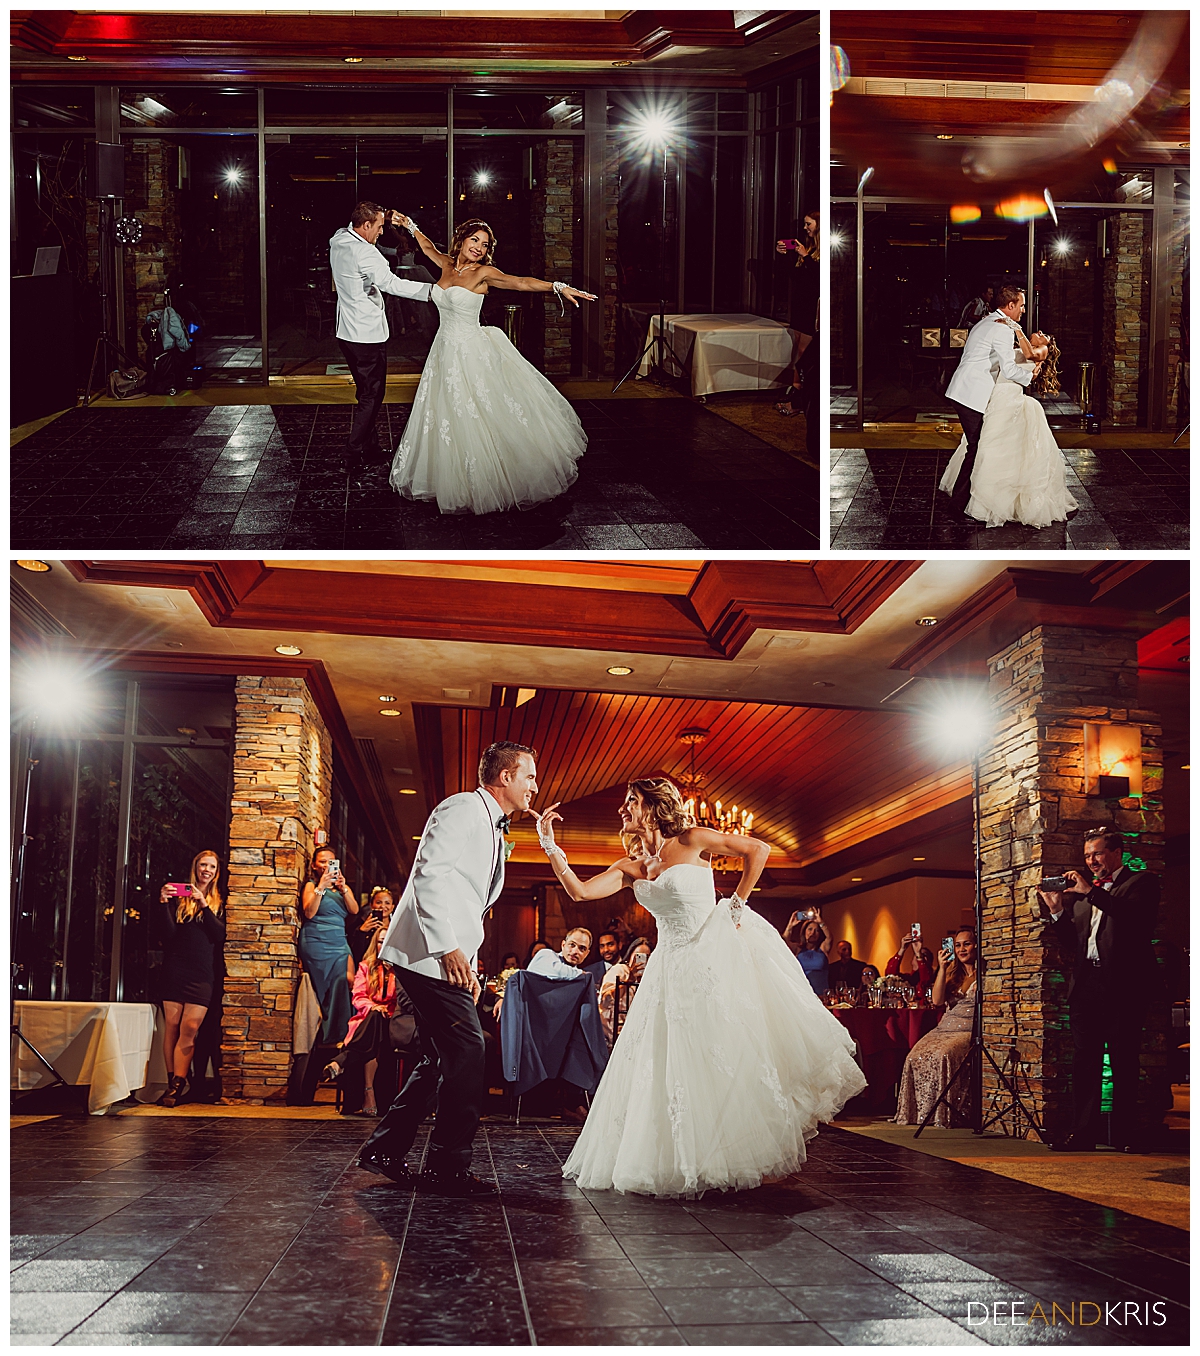 Three images of bride and groom in choreographed dance.